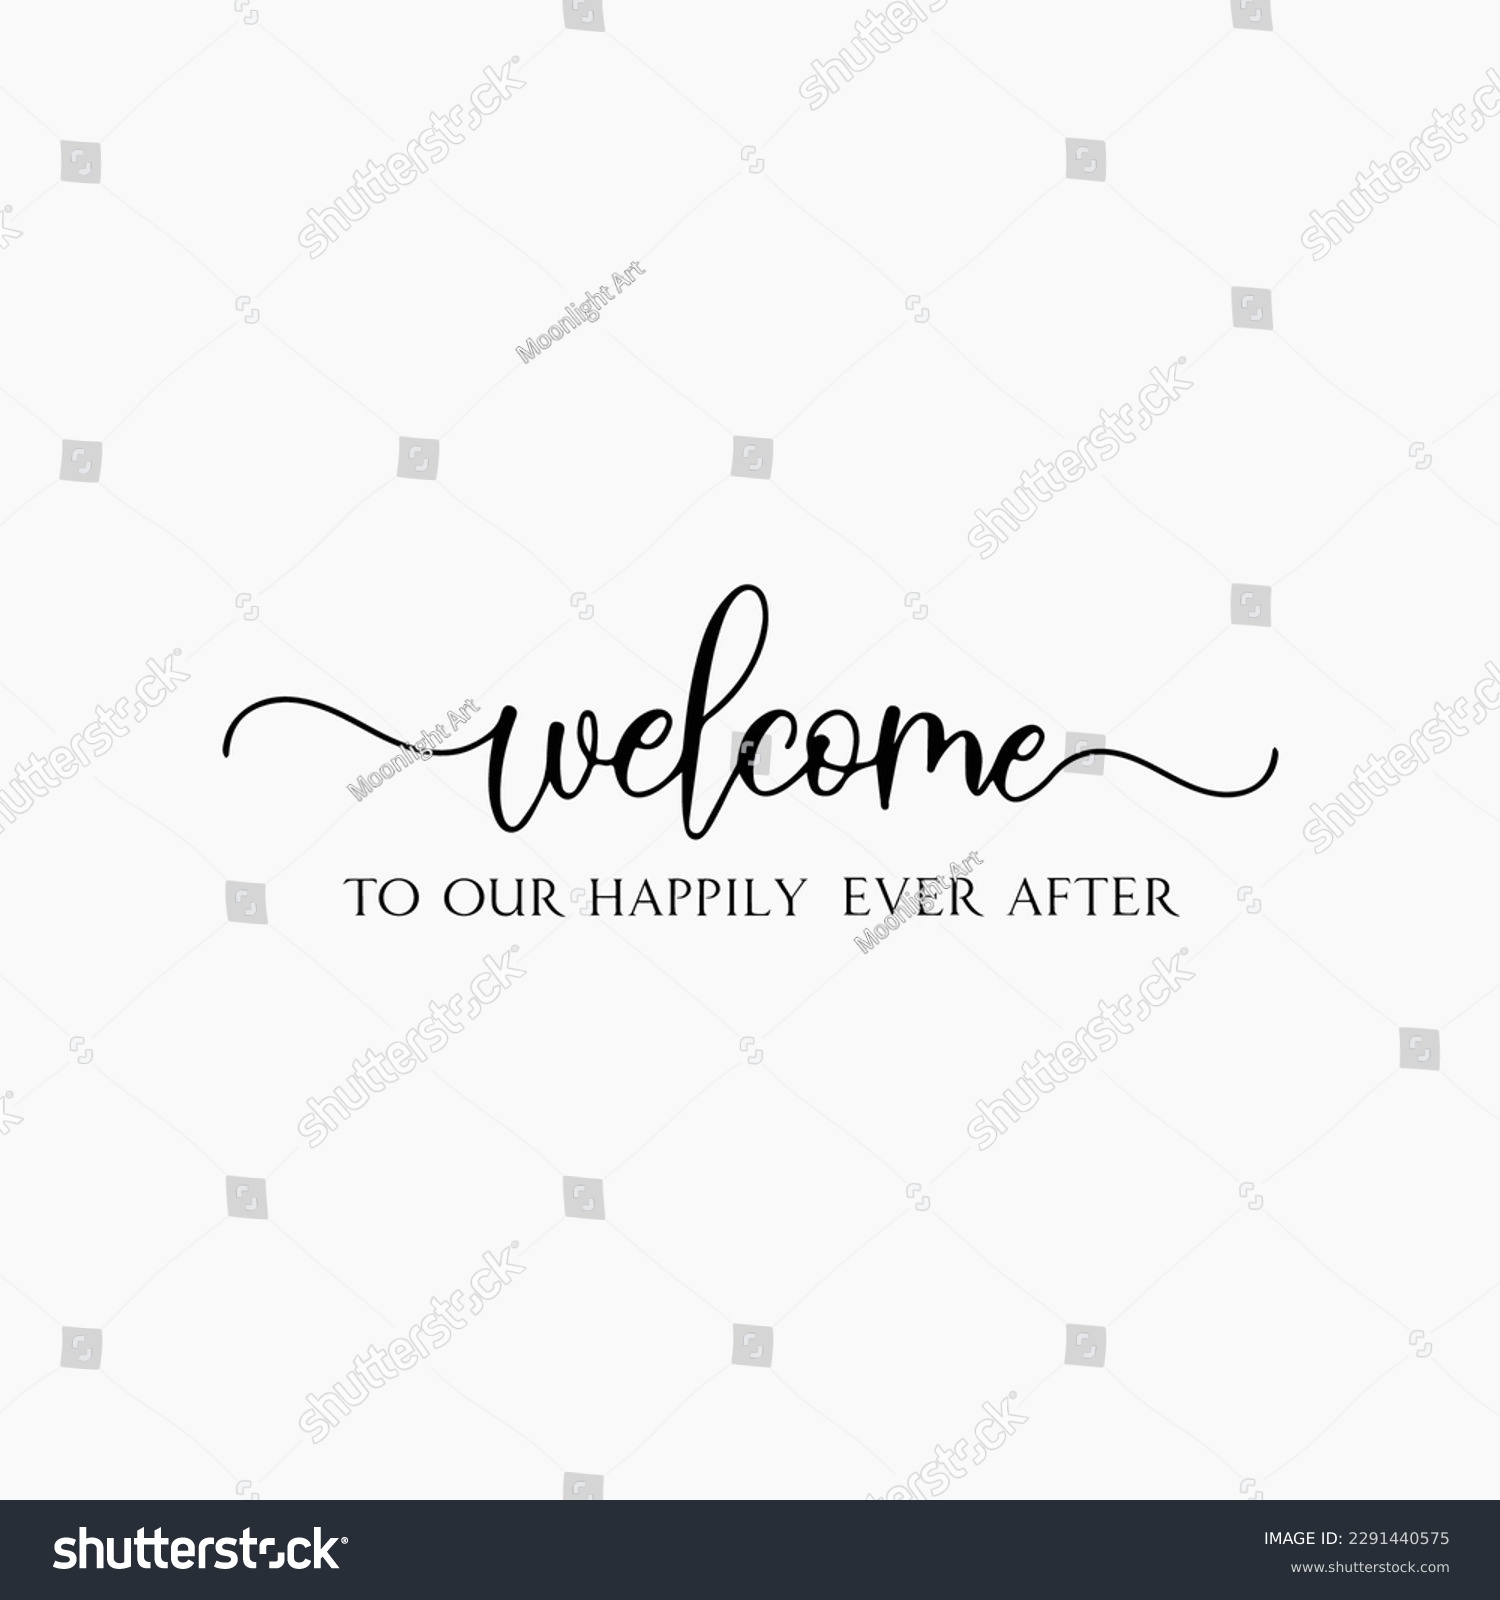 SVG of Welcome To Our Happily Ever After svg, Wedding svg, Wedding SVG, Welcome To Our Wedding svg, dxf, png instant download, Wedding sign  svg